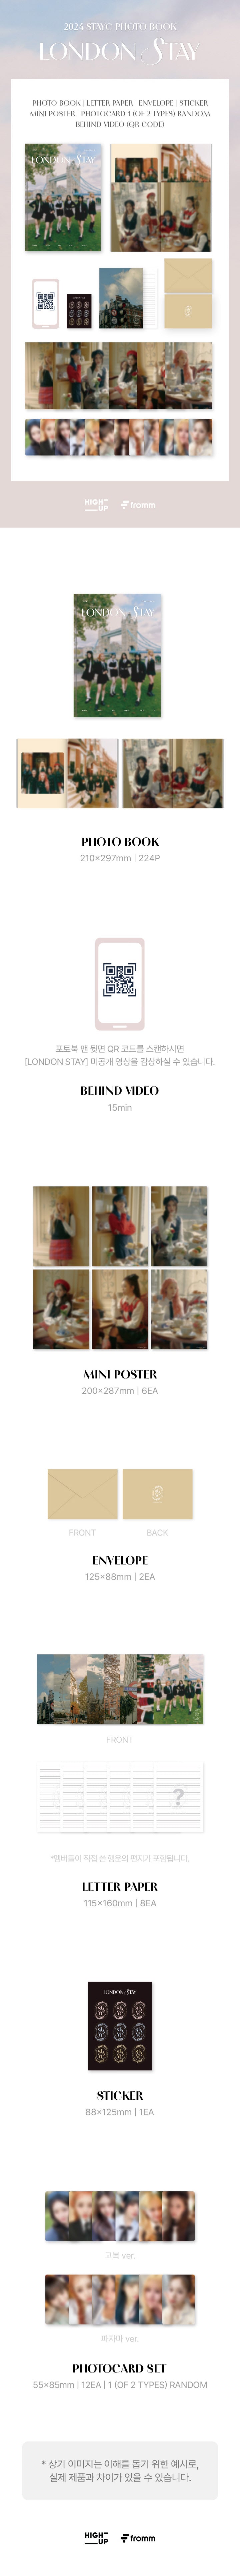 [Product specifications] PHOTOBOOK: 210*297 (224P) *Insert behind-the-scenes video QR code on the back MINI POSTER: 200*28...